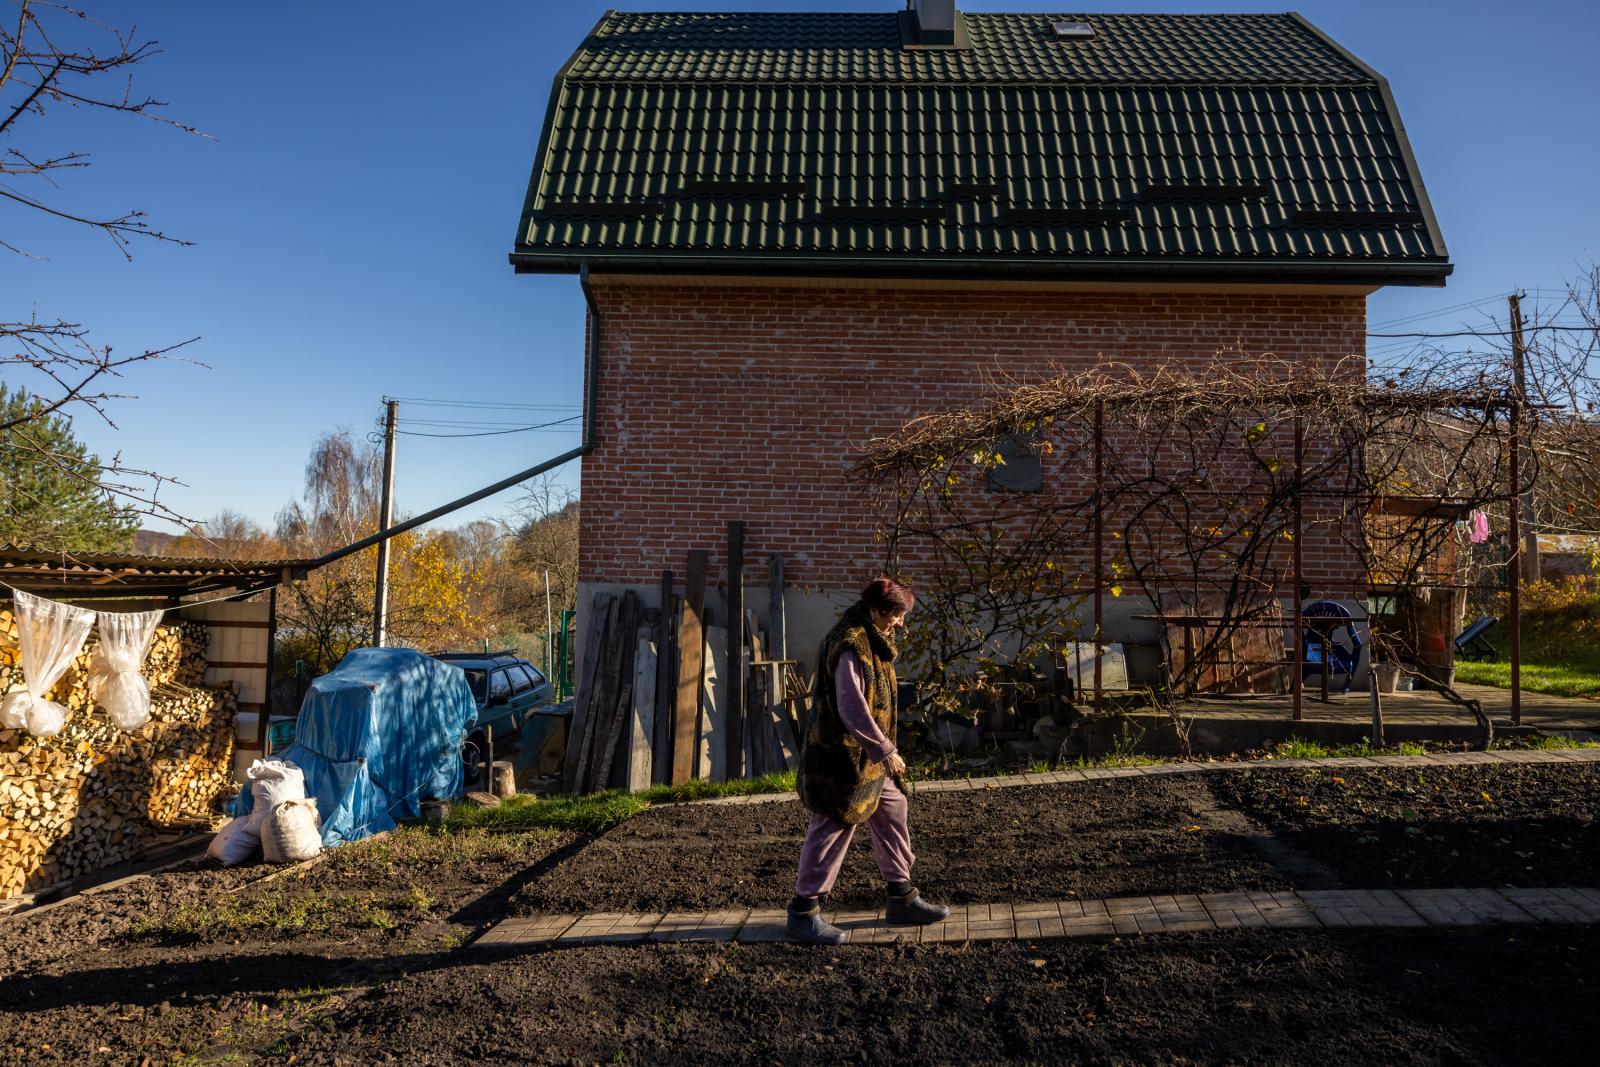 Ukrainians’ countryside getaways have become off-grid safe havens from Russian attacks